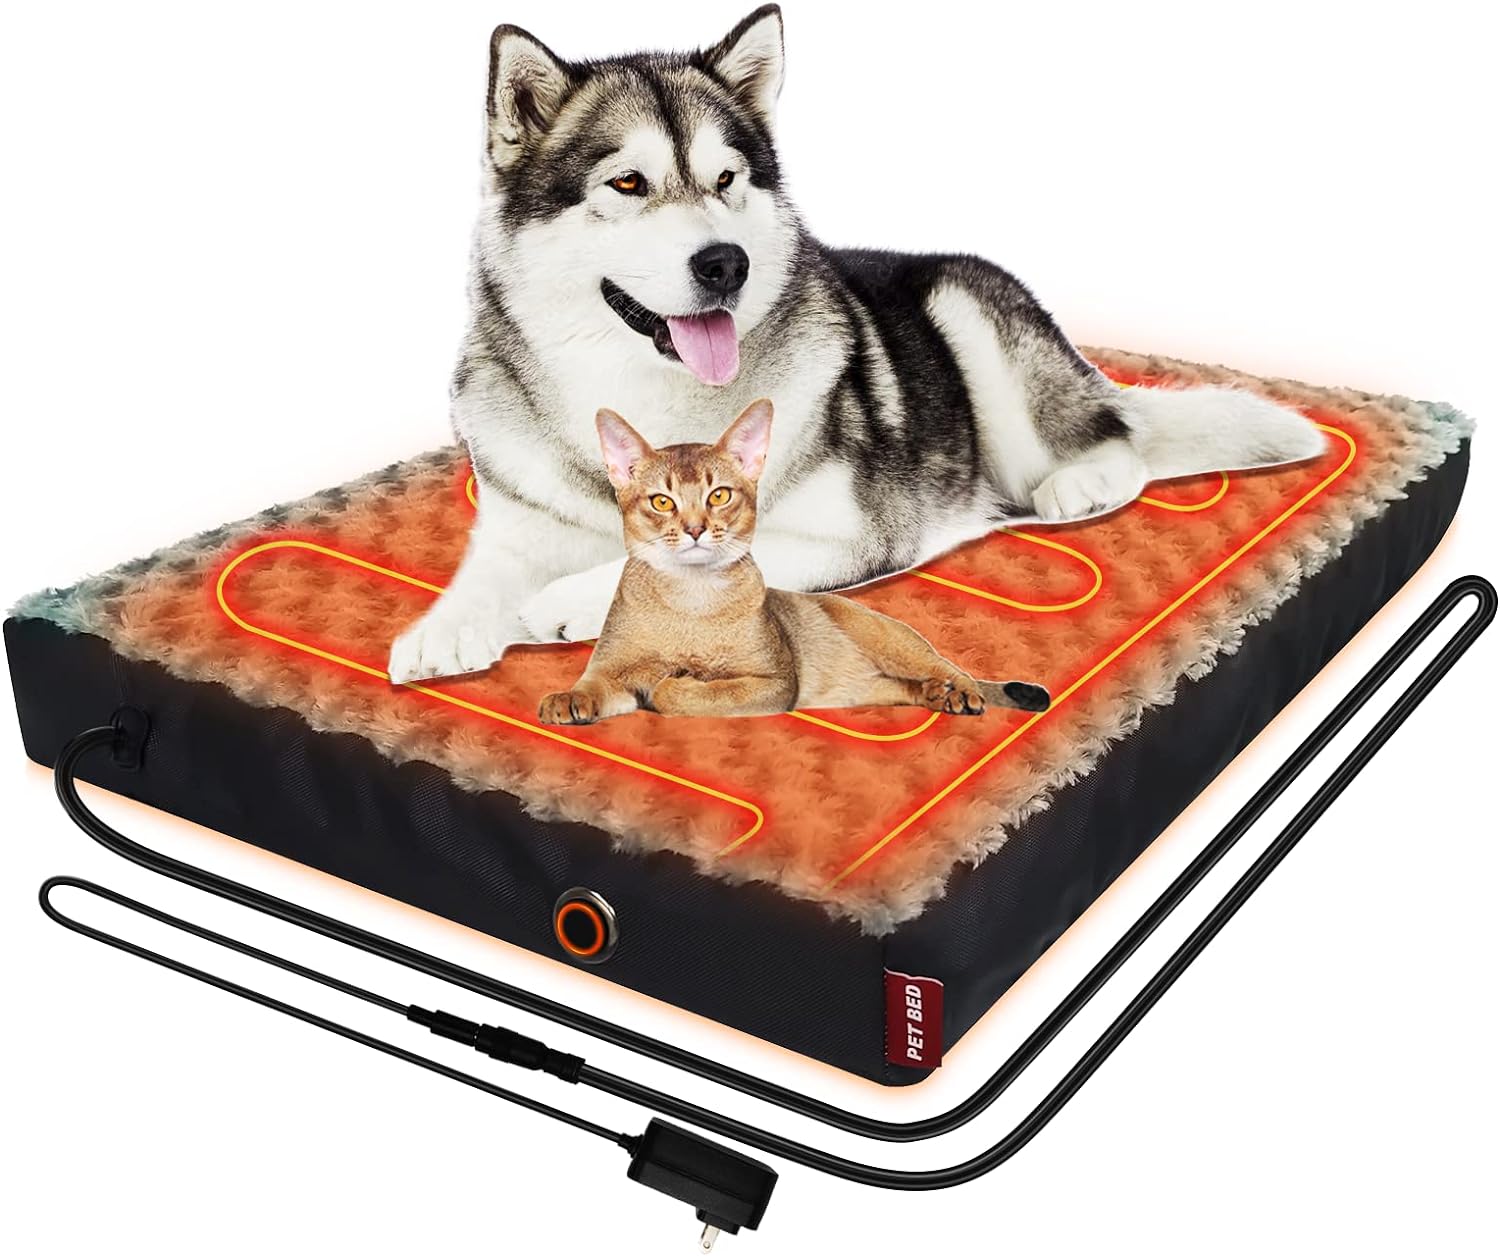 HyphessAda Upgraded Heated Dog Bed with Enlarged Heating Area, 12V Safe Voltage Arthritis Orthopedic Dog Bed with Memory Foam, Heated Pet Bed with Waterproof Cover for Medium, Large, XL Dogs (XL)